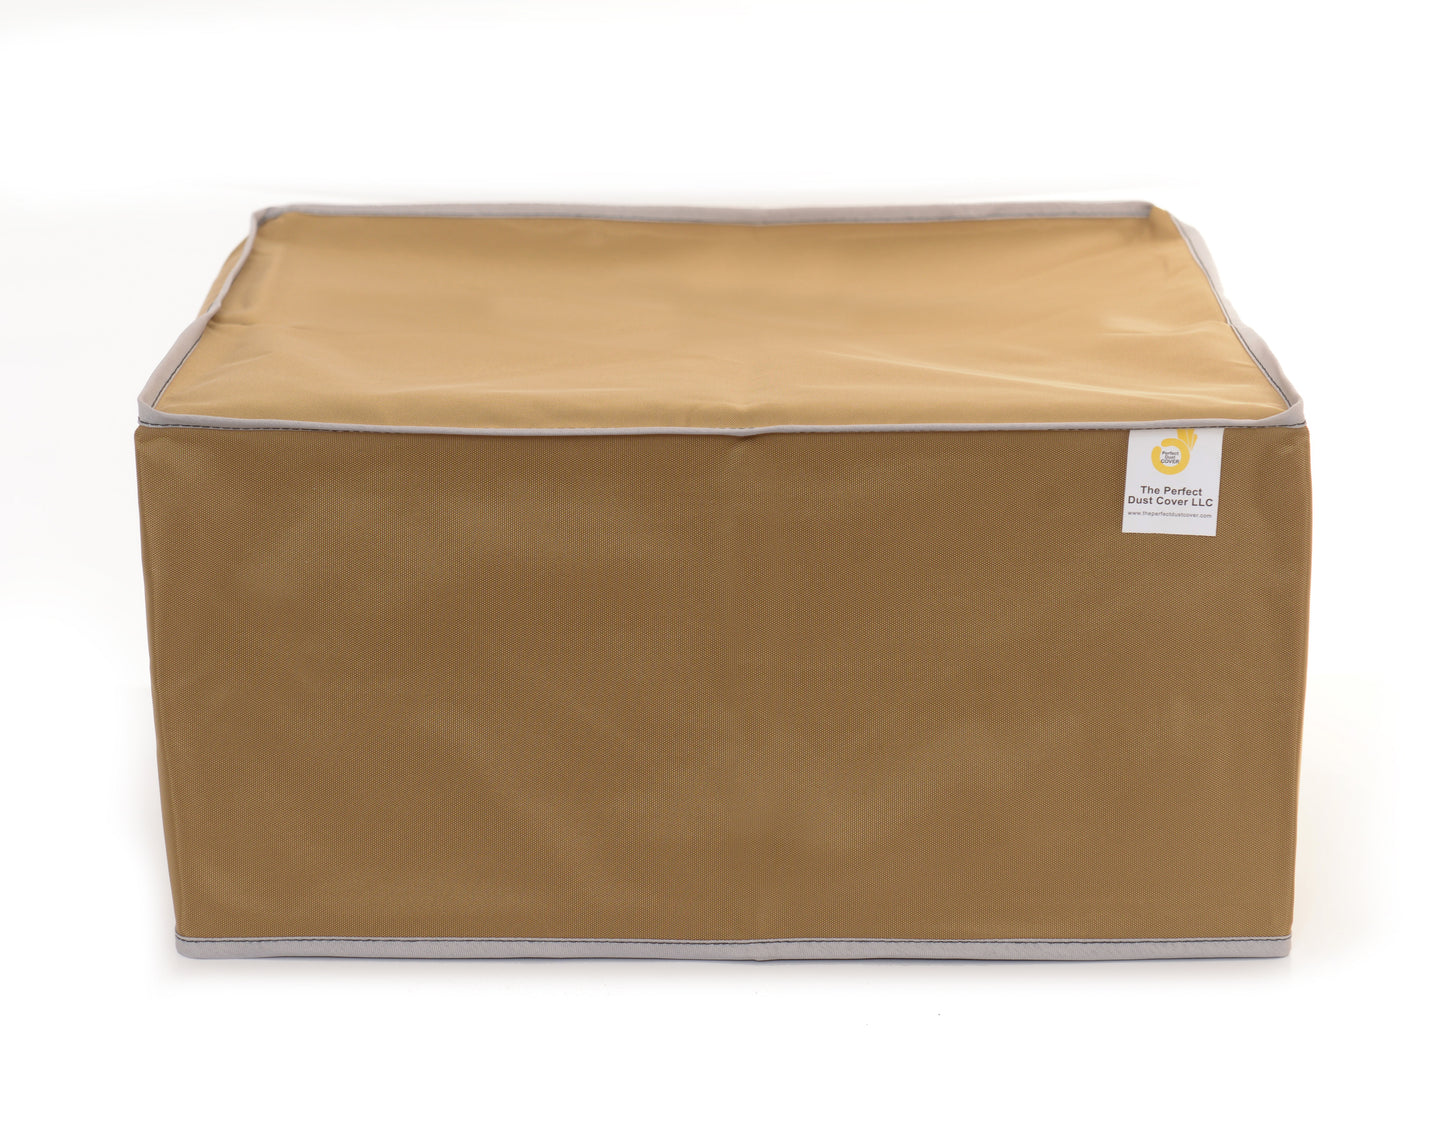 Perfect Dust Cover, Tan Nylon Cover Compatible with HP Deskjet Plus 4100e All-in-One Printer, Anti-Static and Waterproof Dimensions 16.9''W x 13.1''D x 7.8''H by The Perfect Dust Cover LLC